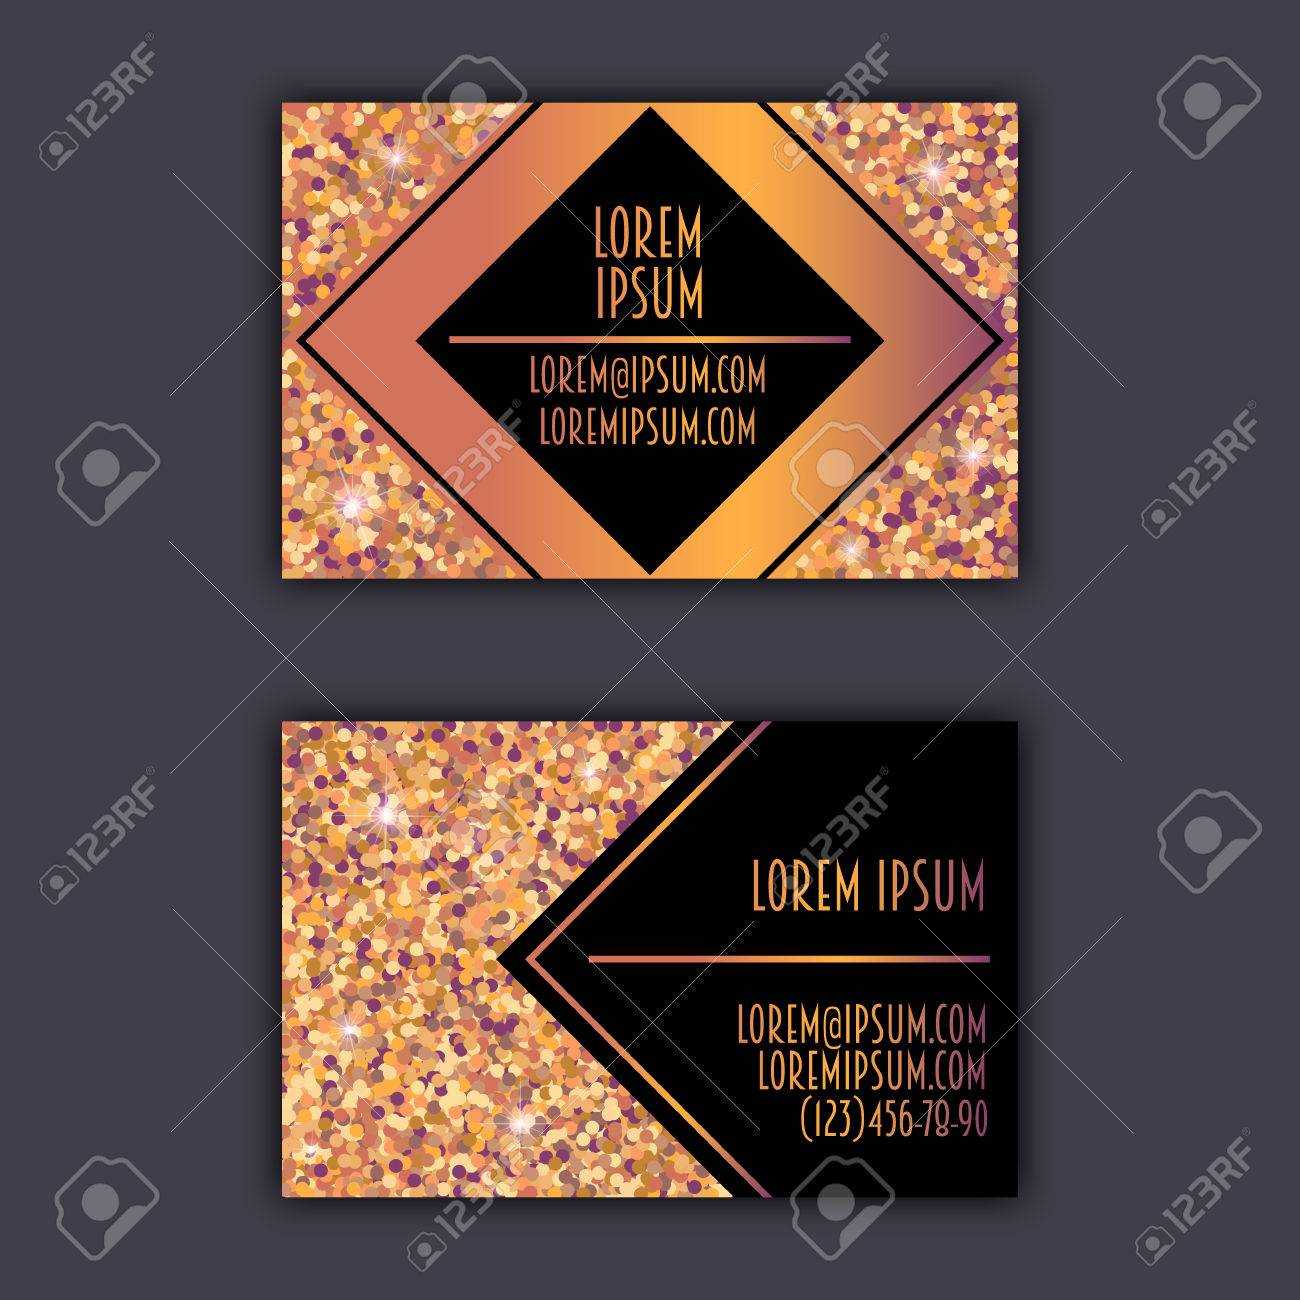 Business Card Templates With Glitter Shining Background. Throughout Christian Business Cards Templates Free